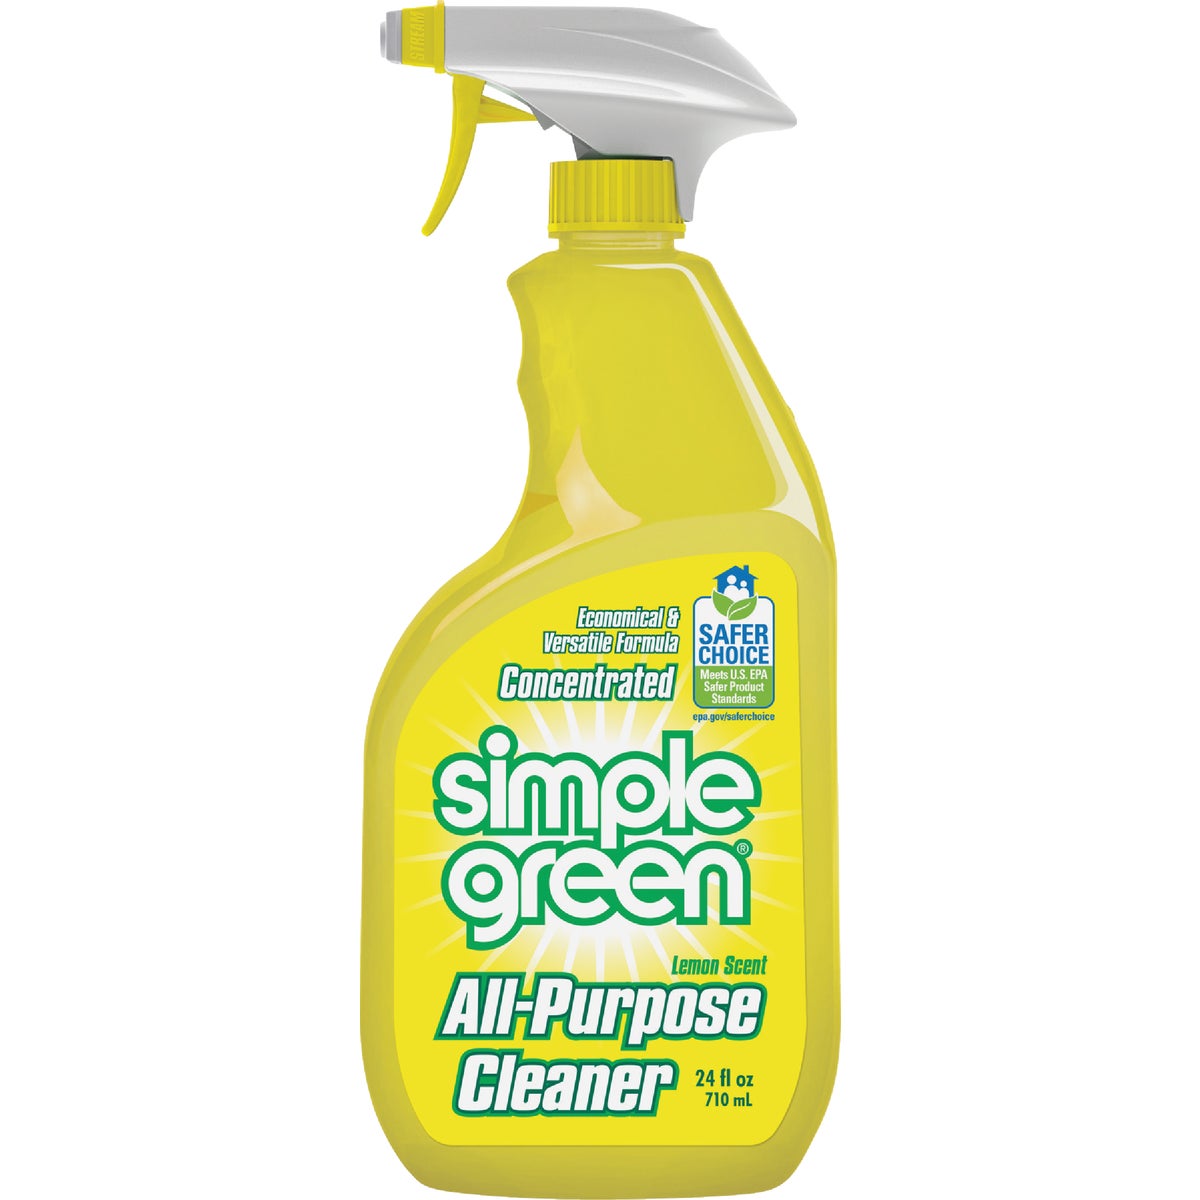 Item 620885, EPA Safer Choice Certified Simple Green Lemon All-Purpose Cleaner is a 